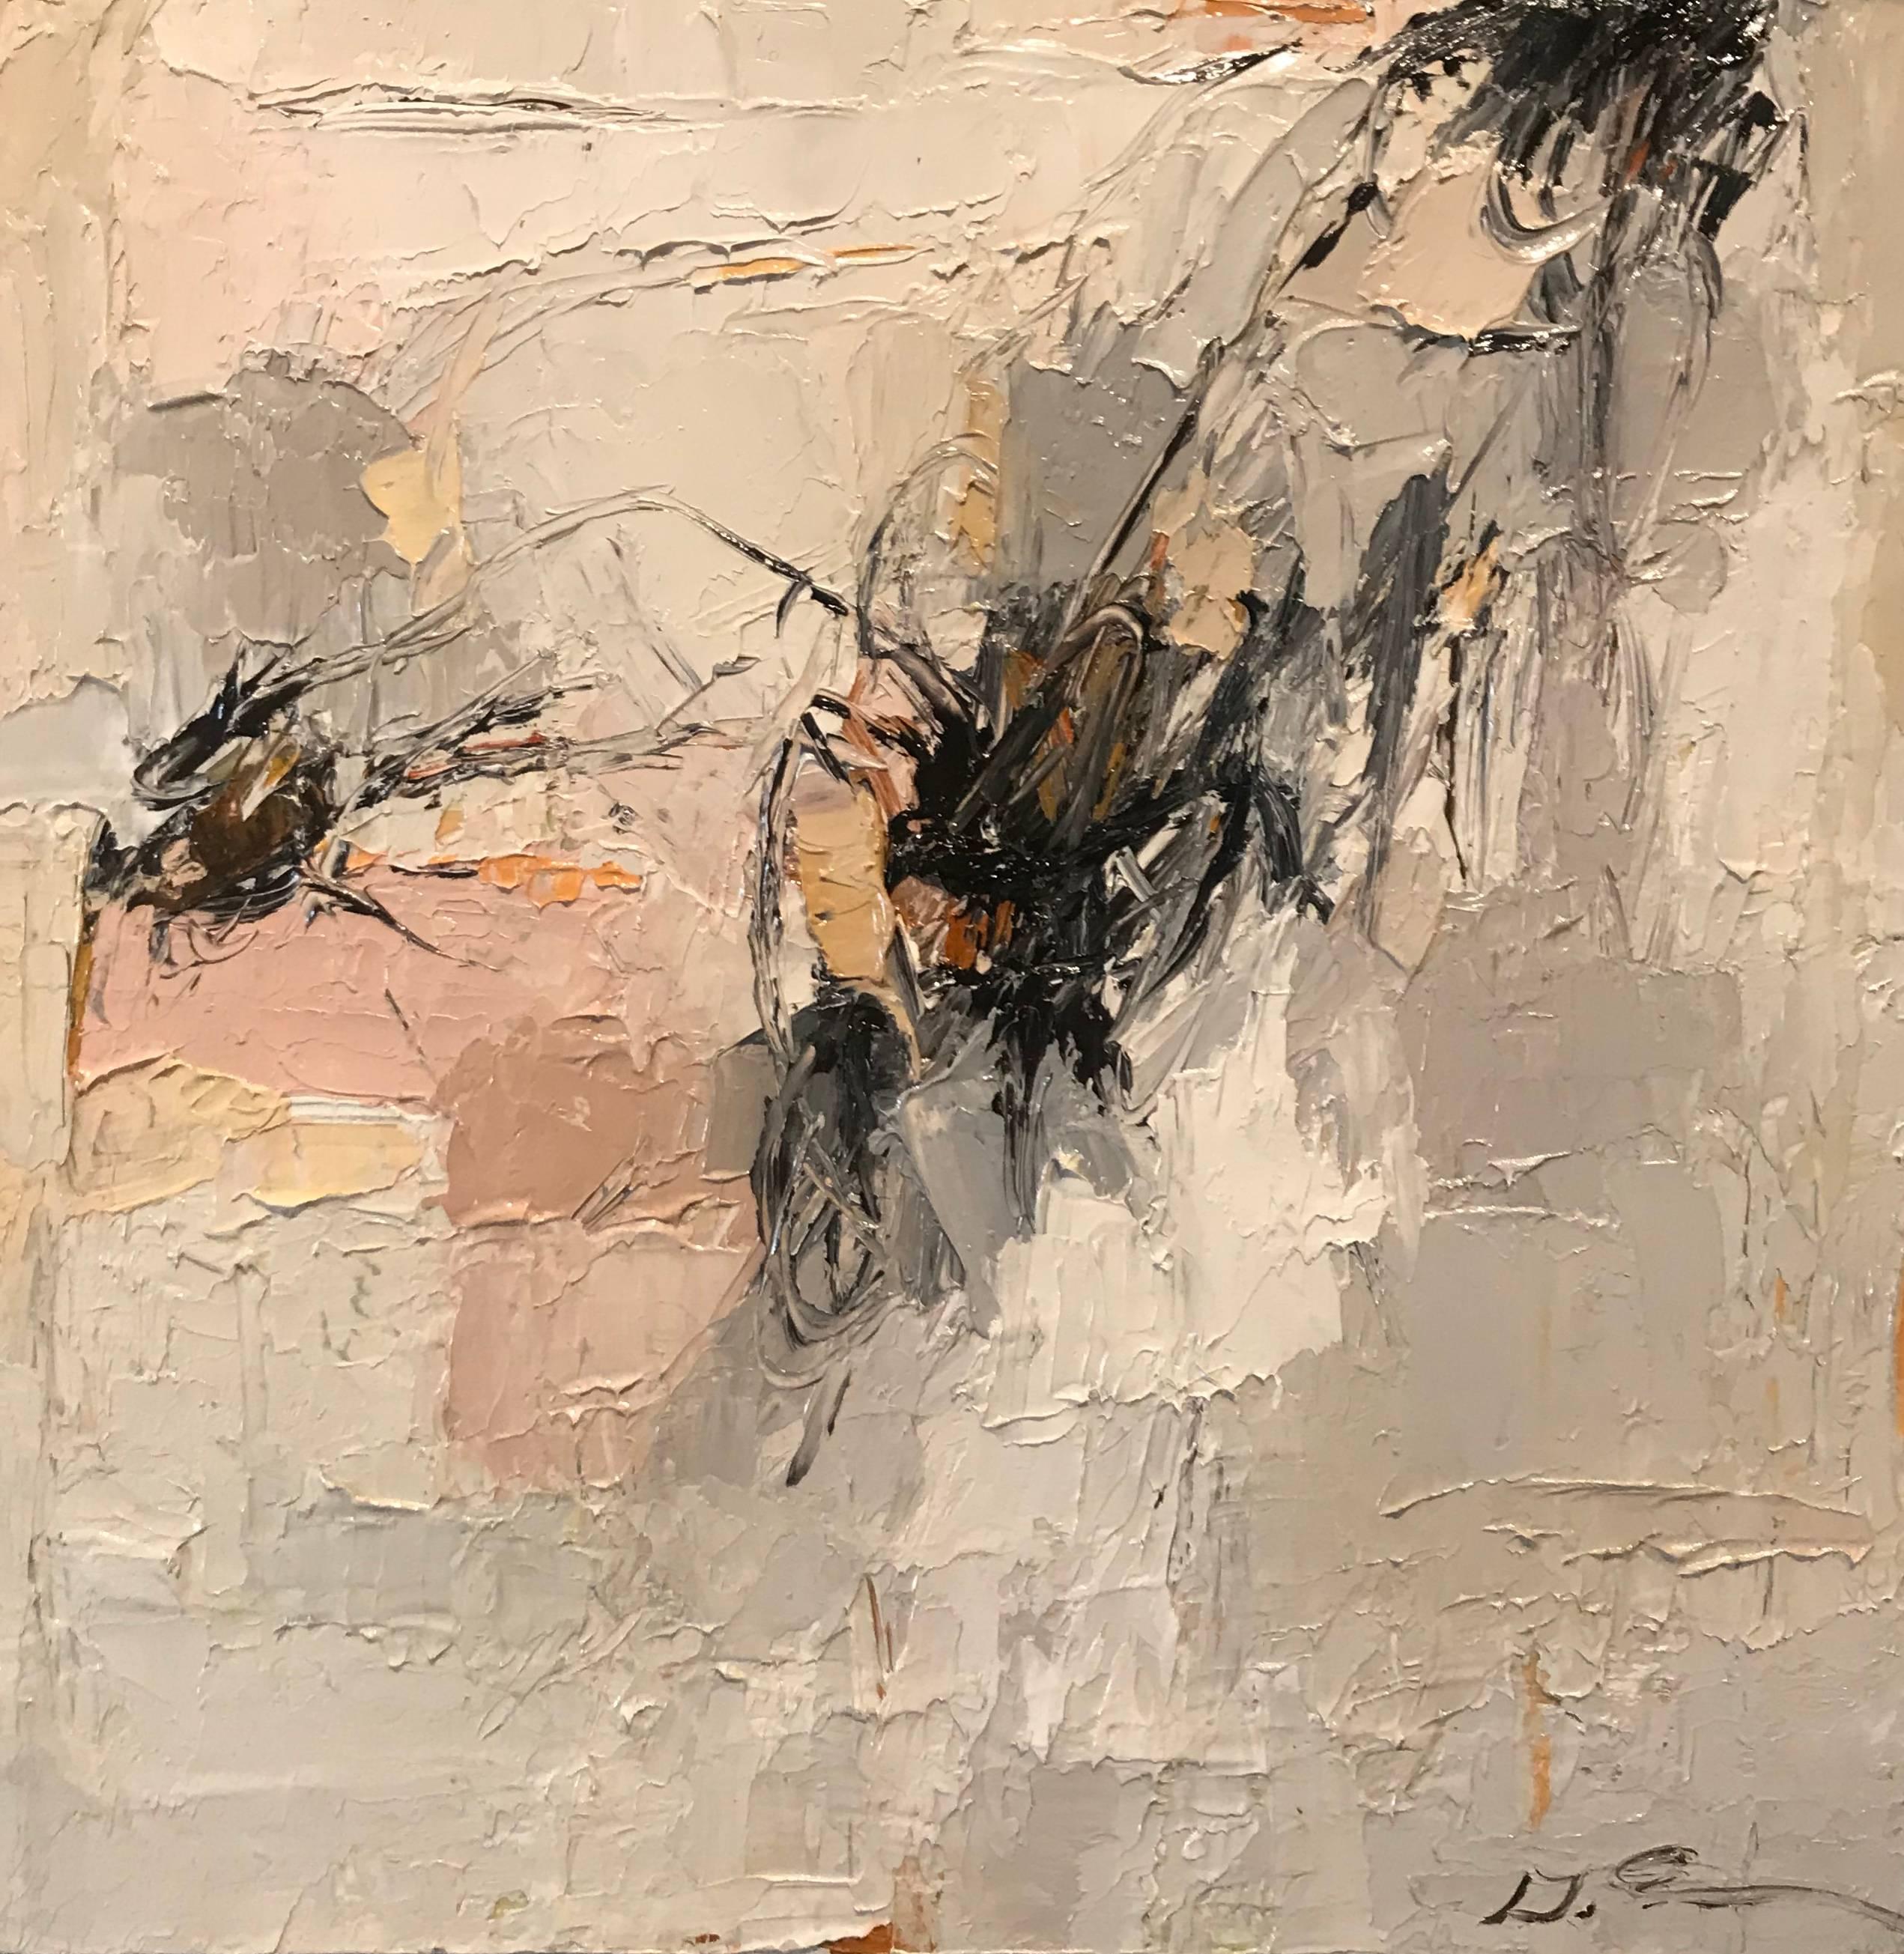 'Between the Lines' is a small size abstract framed oil on canvas painting created in 2018 by American artist Geri Eubanks. Featuring a soft palette mostly made of black, grey, tan and light pink tones, the painting shows an impasto technique